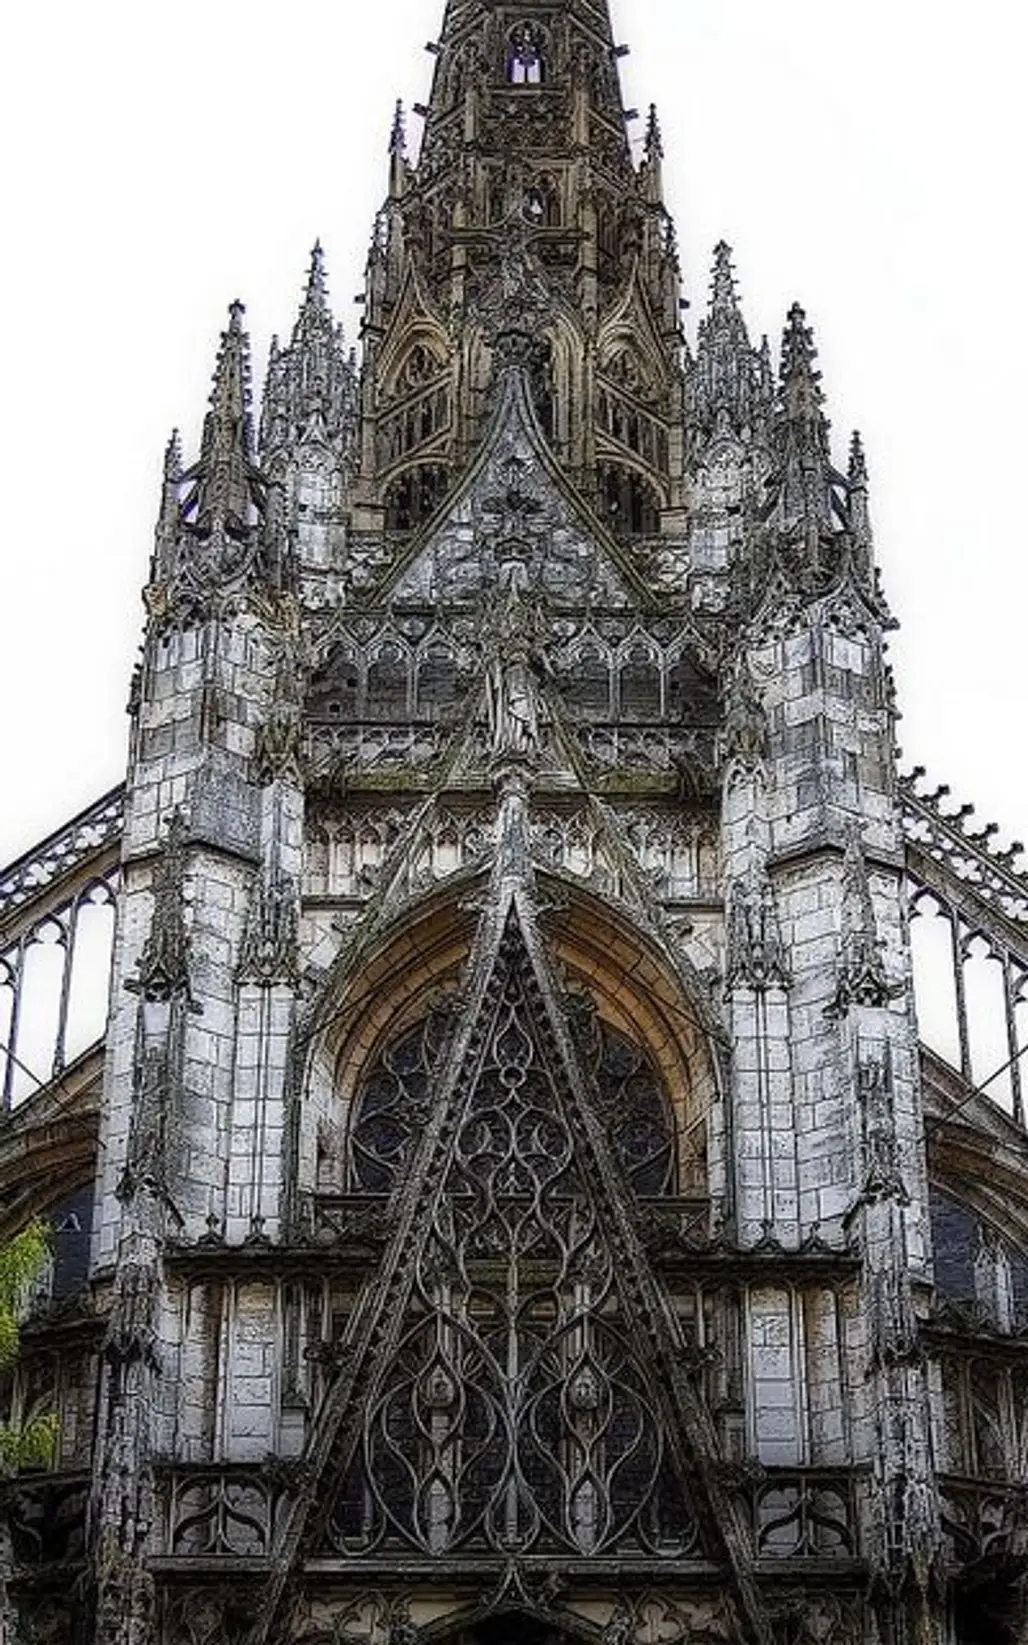 LATER FRENCH GOTHIC